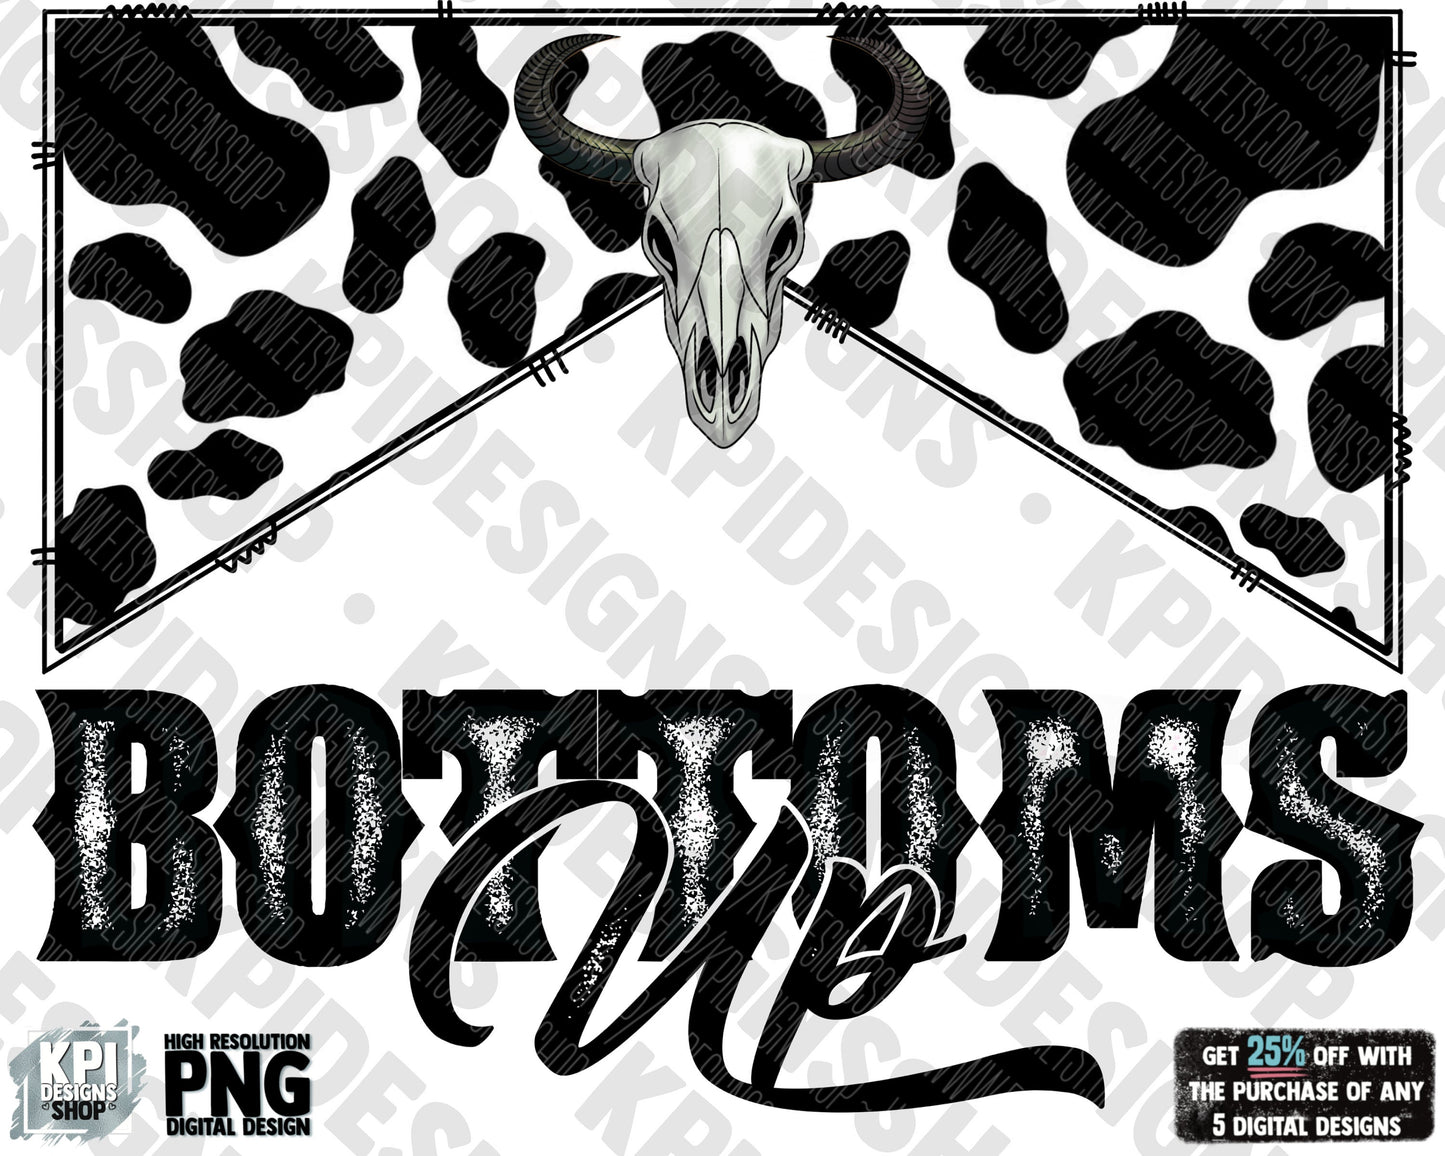 Bottoms Up - Bullhead - Cow Print - Country Music Junkie - Country Music Concert - PNG - Digital Design